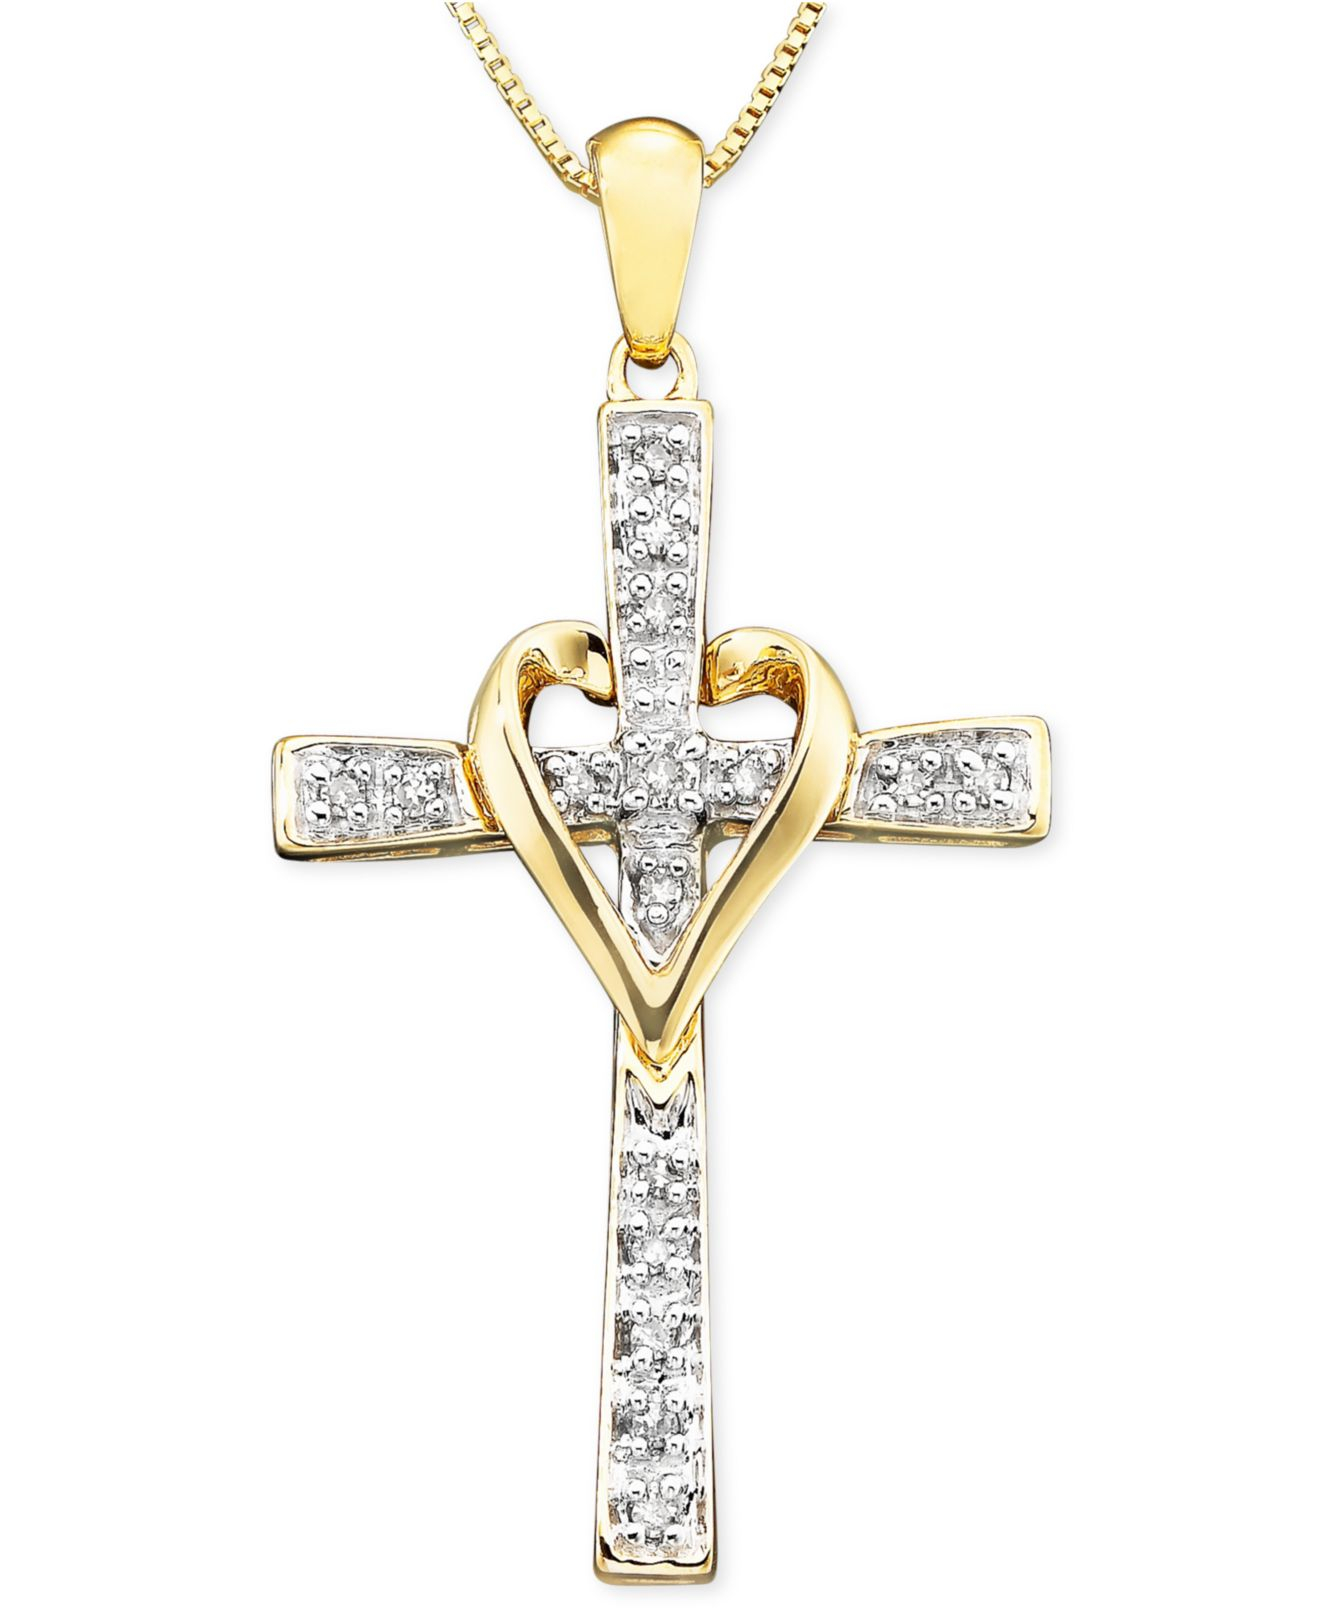 macys us gold cross diamond pendant necklace in 14k gold 110 ct tw product 1 17152822 0 120774459 normal